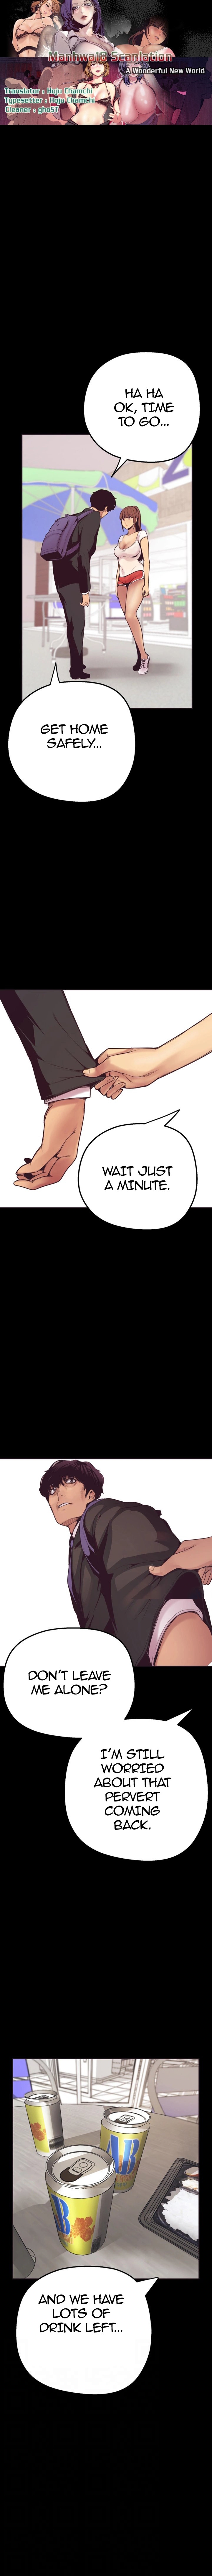 Panel Image 1 for chapter 3 of manhwa A Wonderful New World on read.oppai.stream